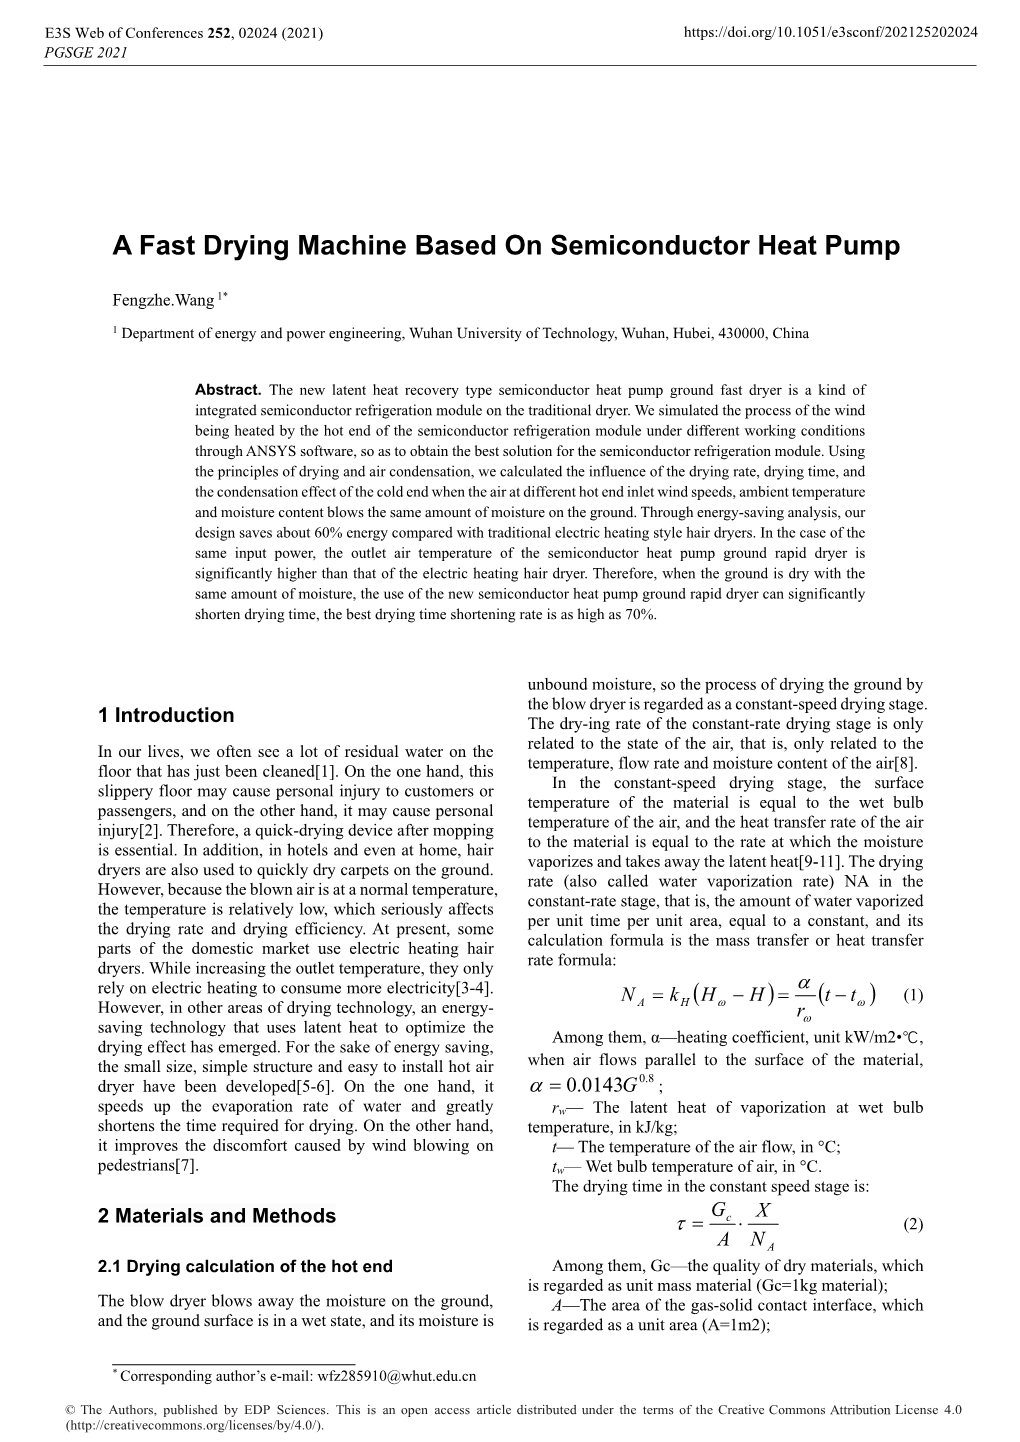 A Fast Drying Machine Based on Semiconductor Heat Pump